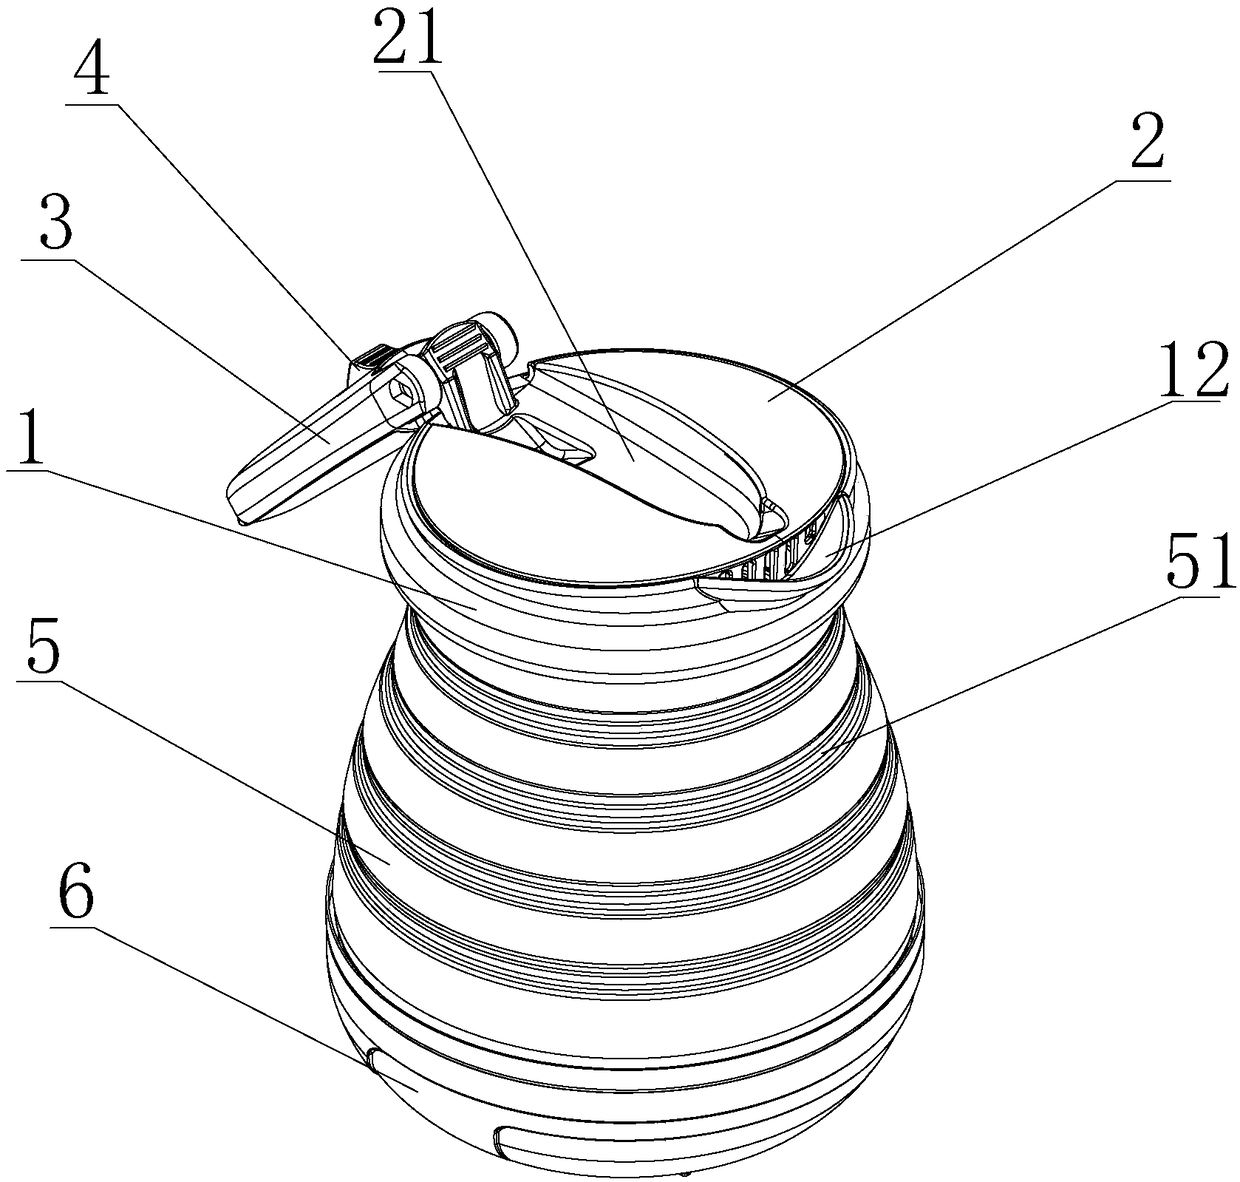 Kettle opening structure with rotationally storable handle and kettle with kettle opening structure